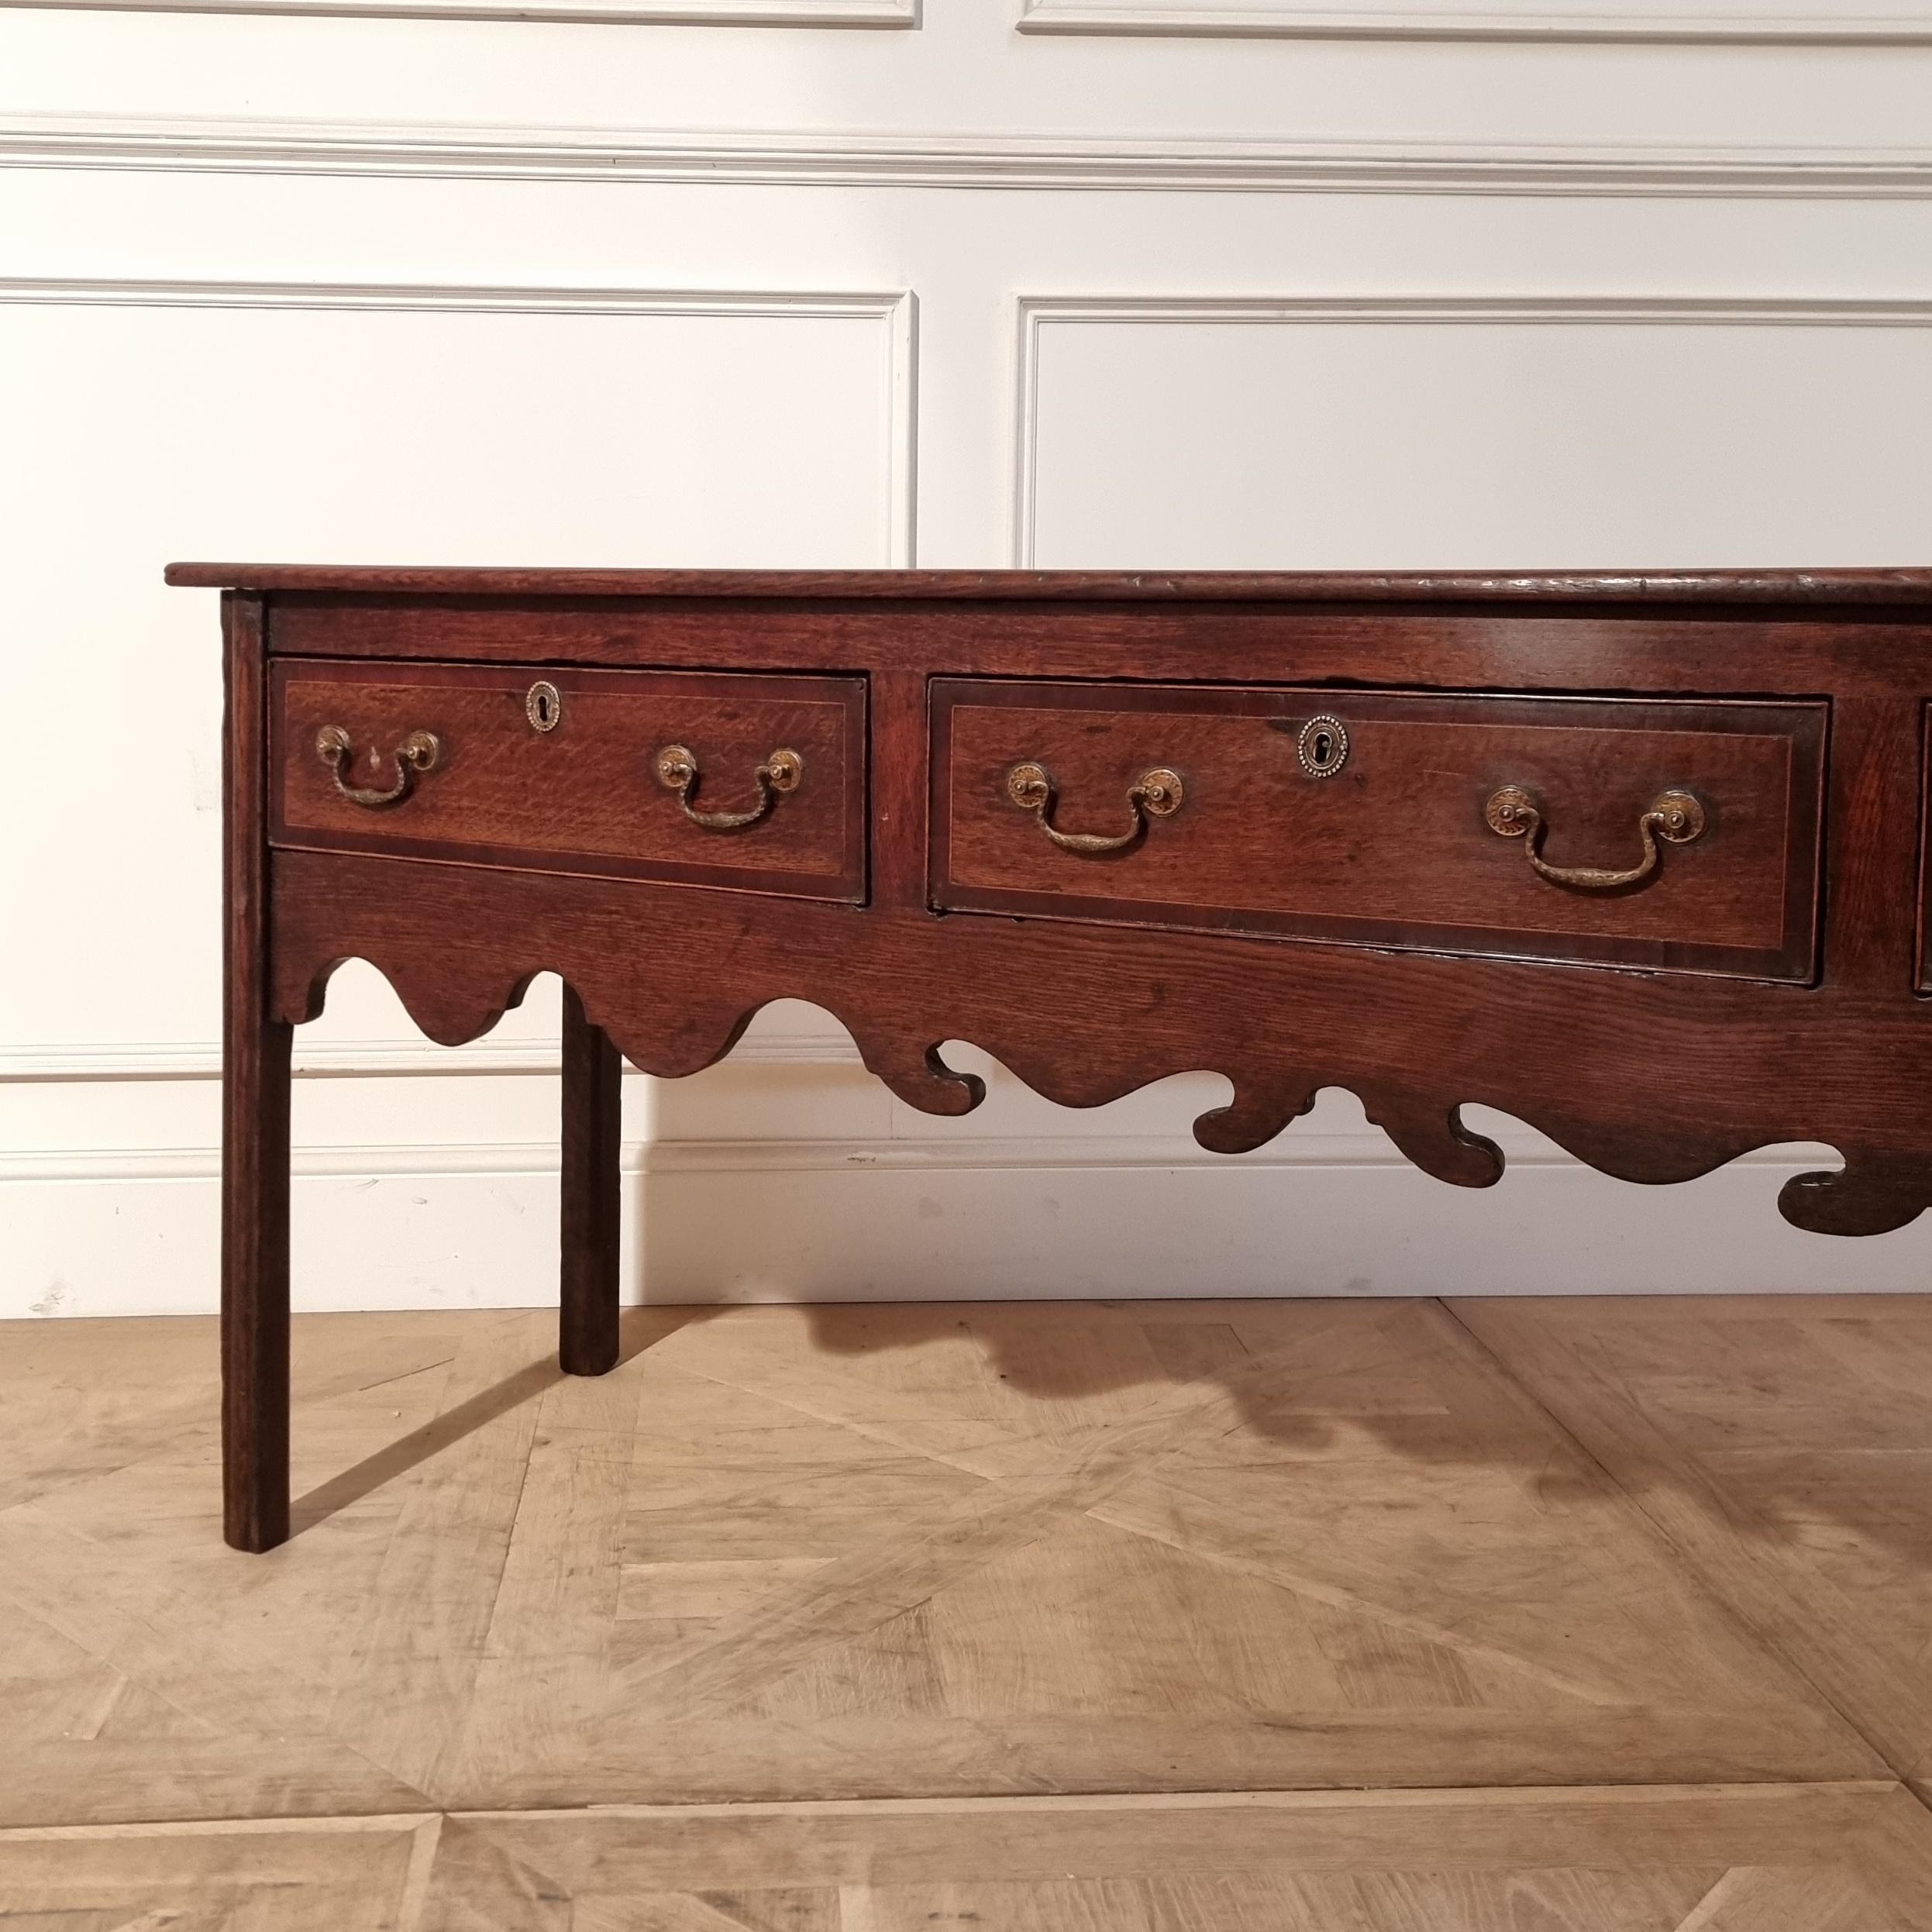 Late 18th C English 3 drawer oak cross-banded dresser base. 1790.

This piece has a rack should you want a full dresser.

Reference: 7721

Dimensions
71 inches (180 cms) Wide
21 inches (53 cms) Deep
30 inches (76 cms) High.